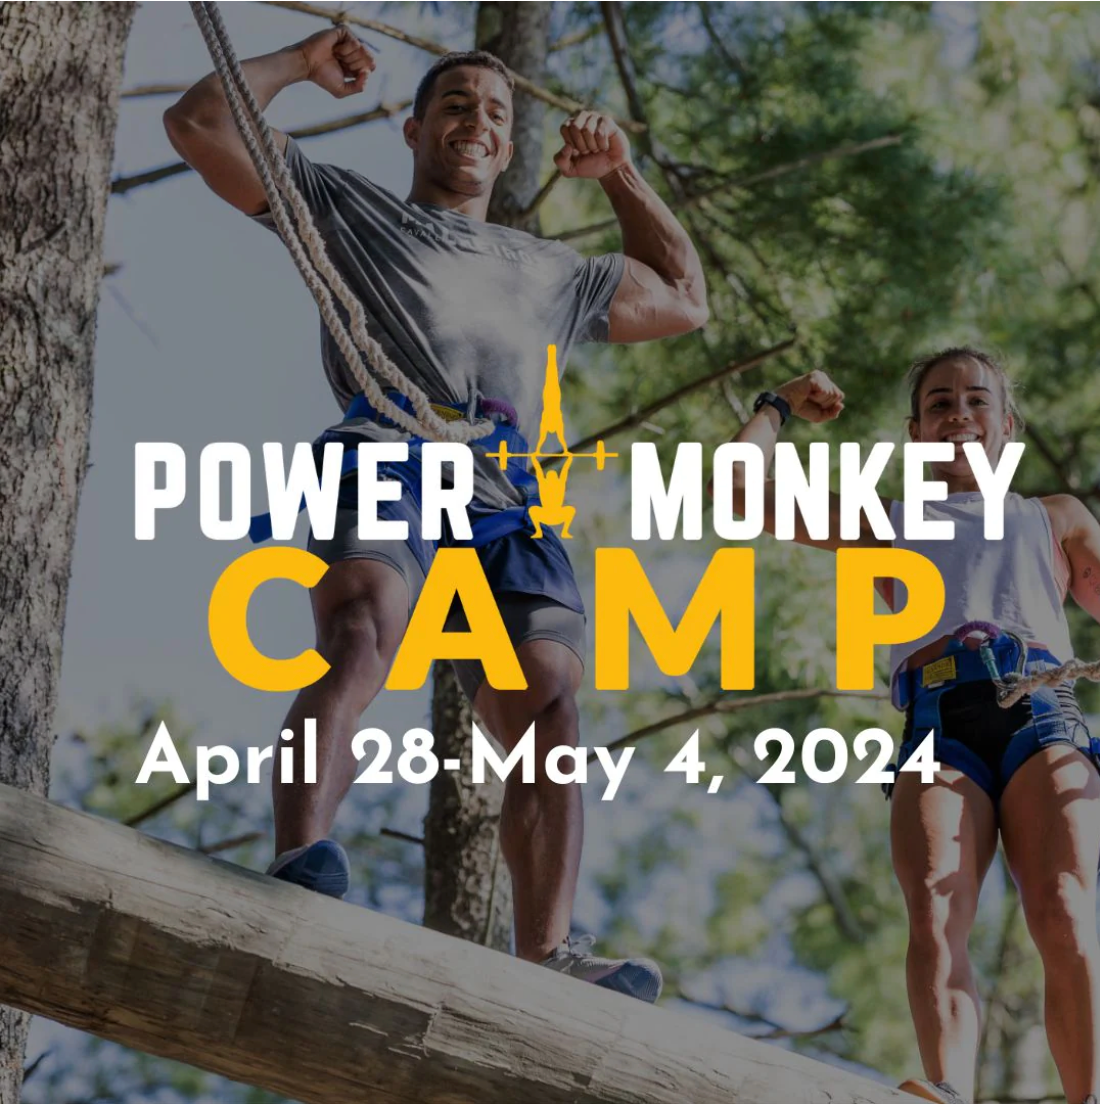 Photo of campers on the high ropes course at Power Monkey Camp. Text says "Power Monkey Camp April 28-May 4, 2024"